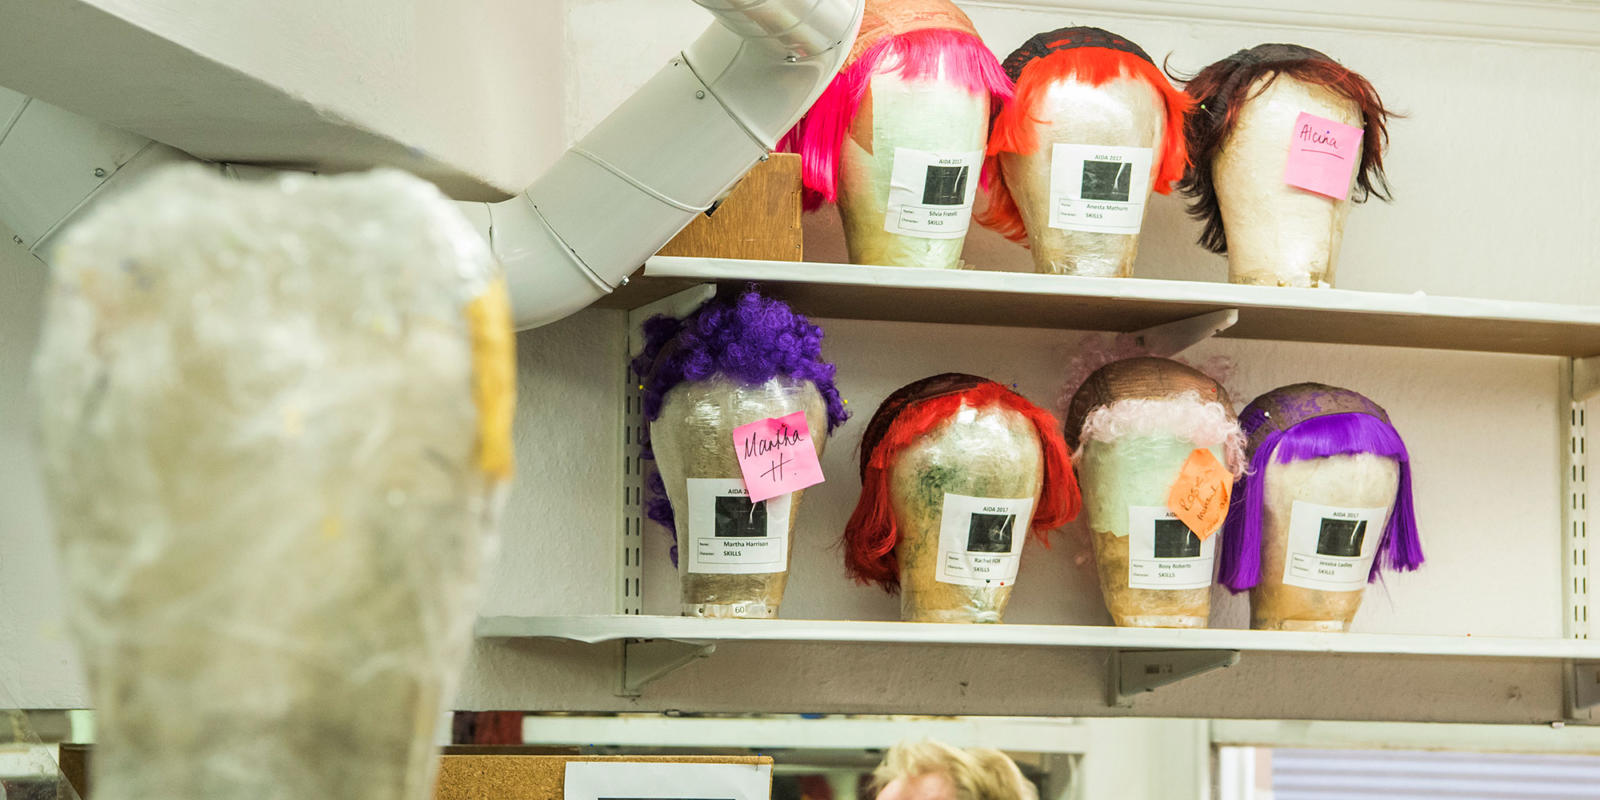 Wigs backstage ready to be worn by the acrobats (c) Tristram Kenton